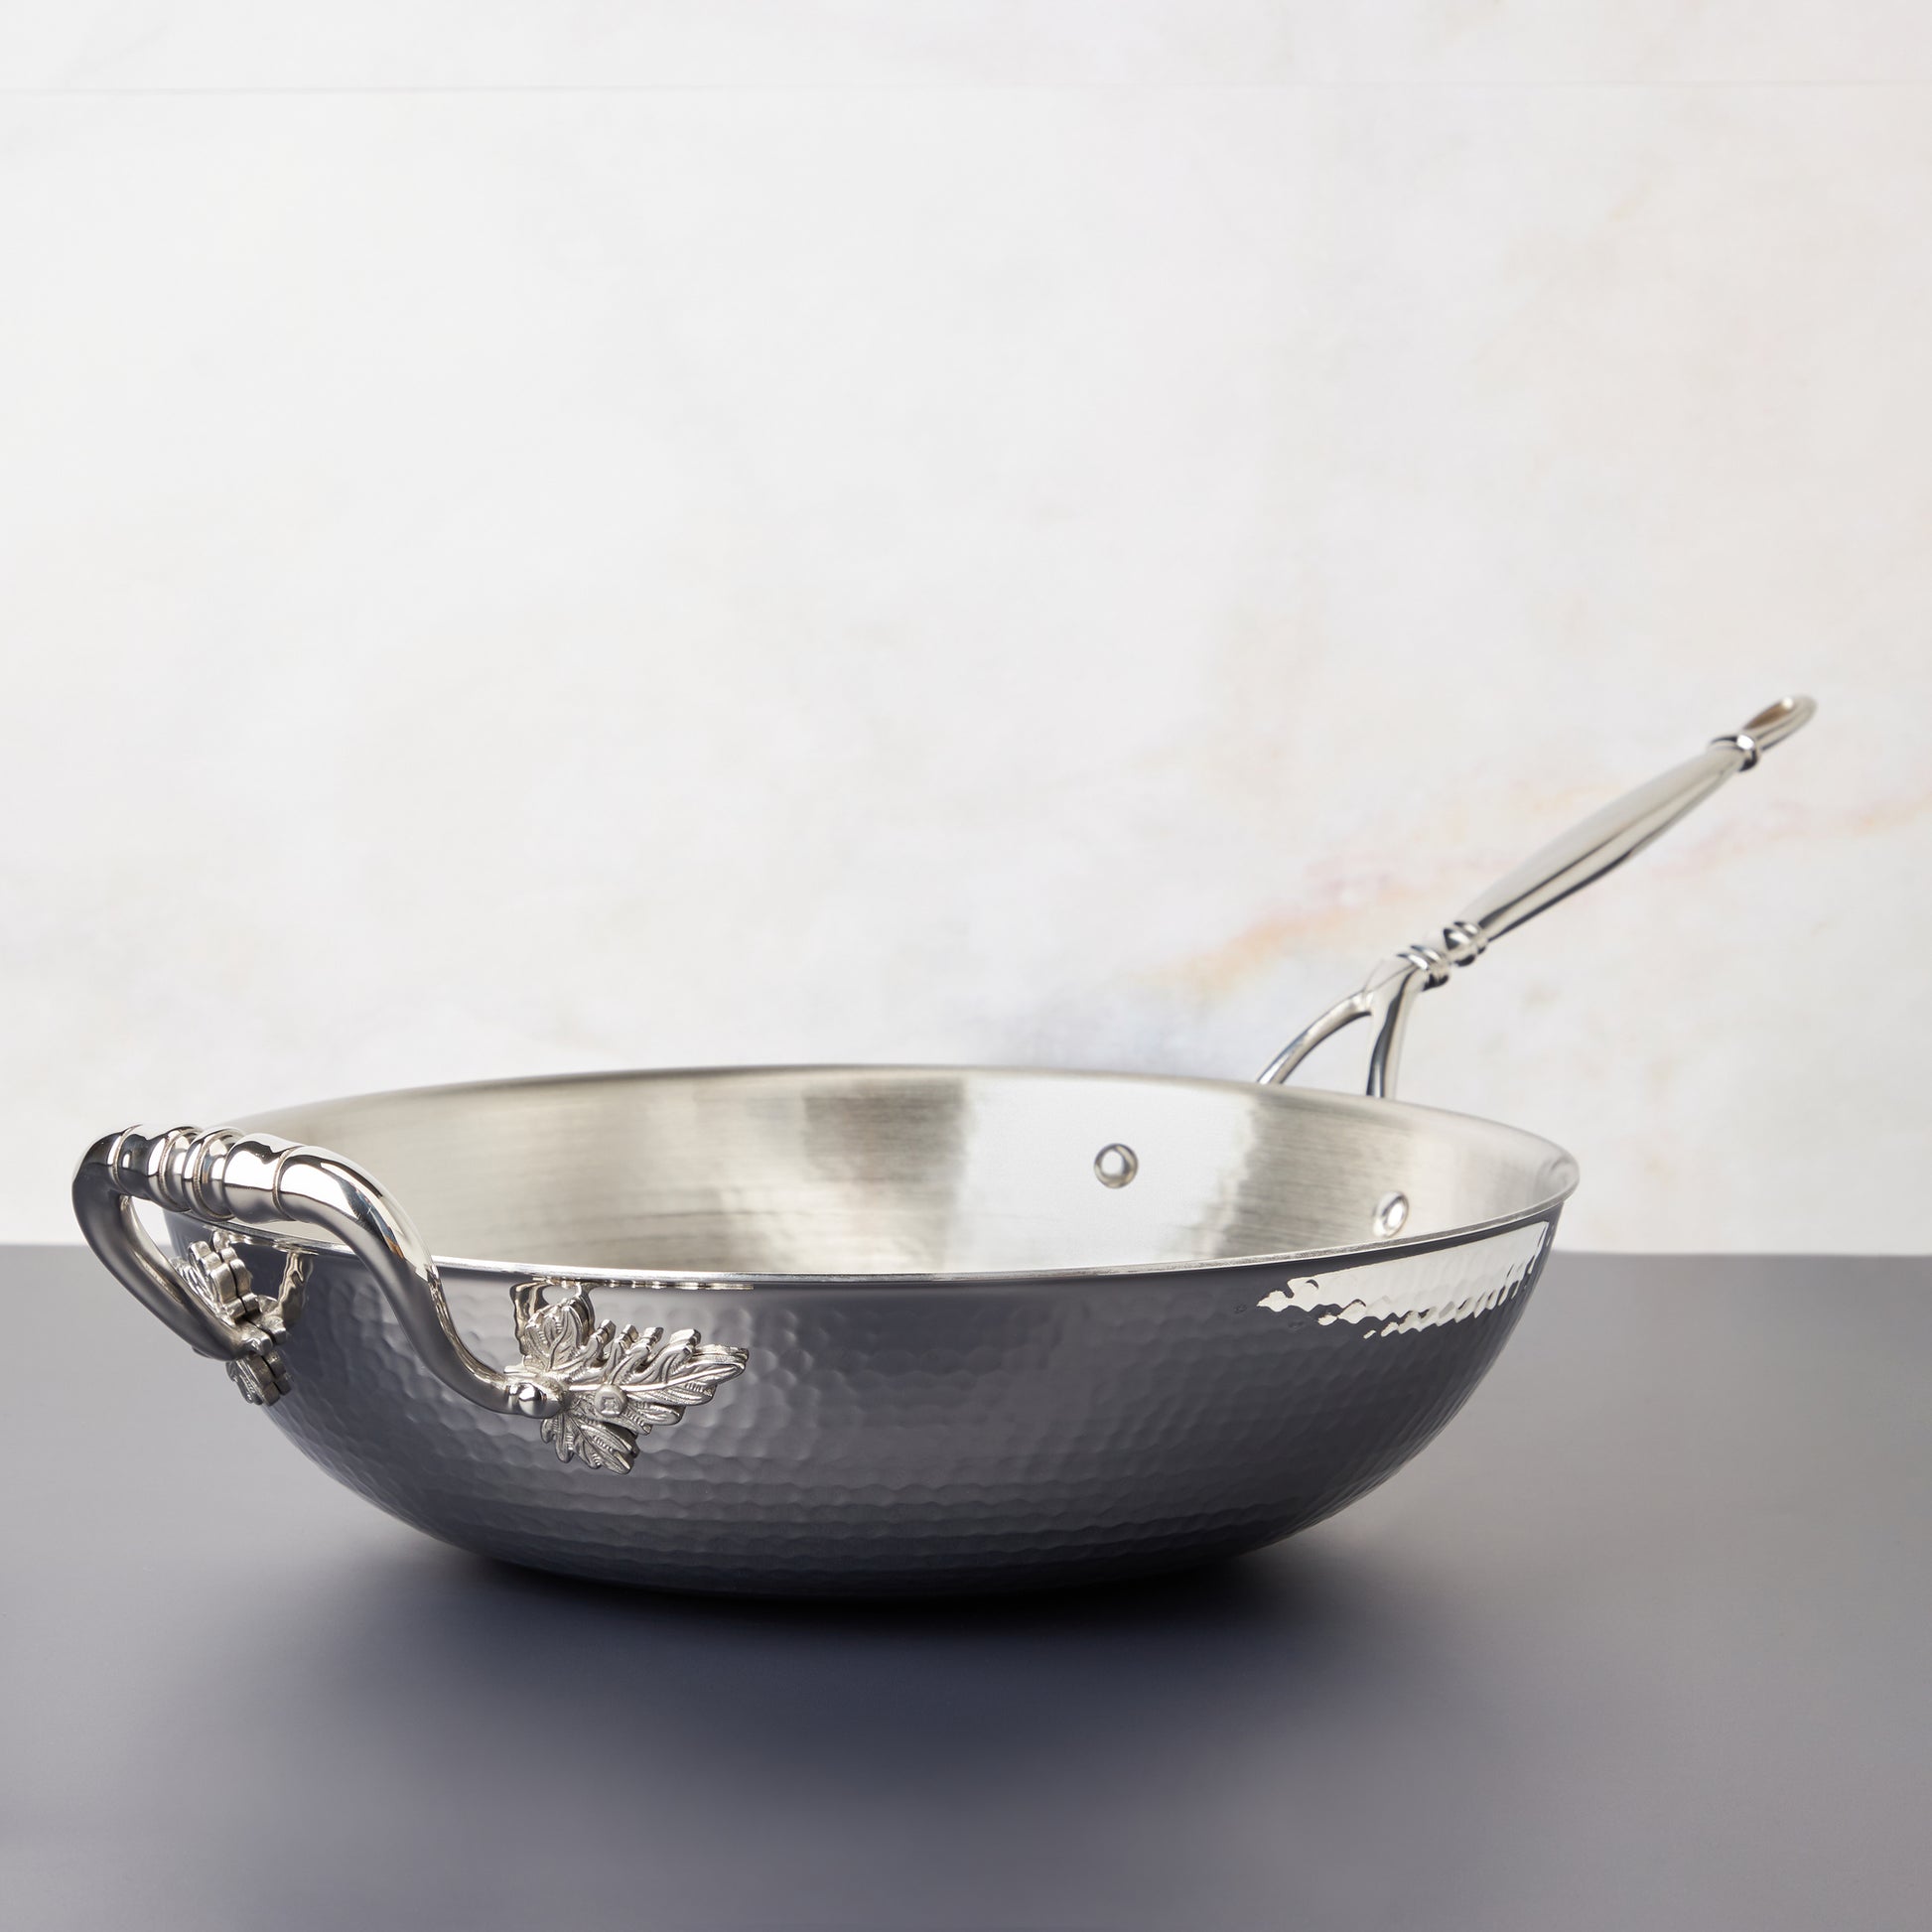 Opus Prima hammered clad stainless Open Wok decorated with delicate leaves on Opus Prima cookware by Ruffoni